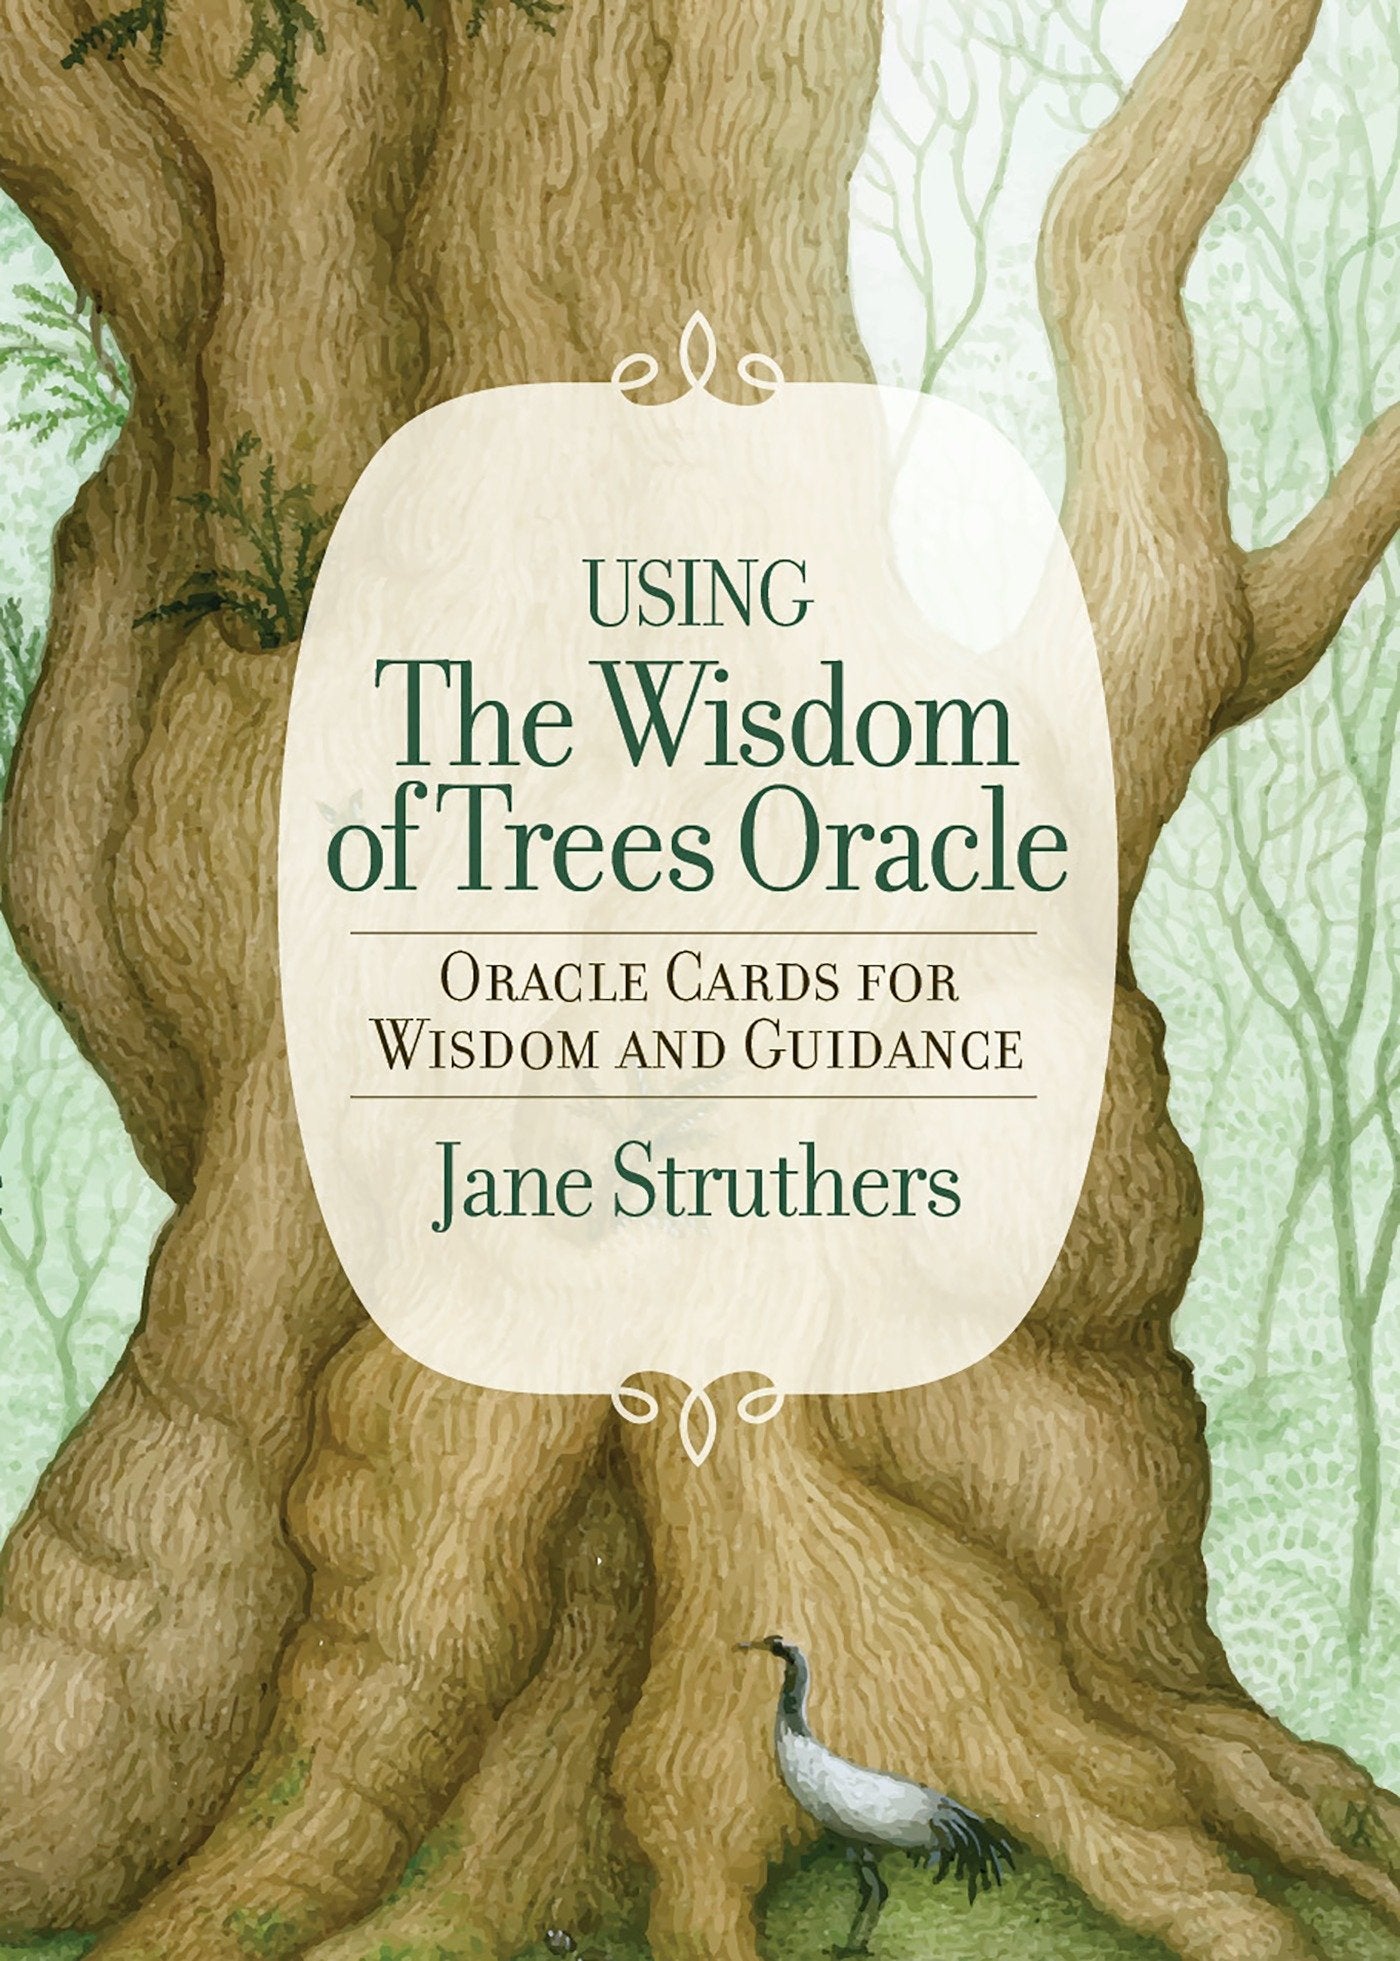 The Wisdom of Trees Oracle Inspirational Card Deck || Jane Struthers